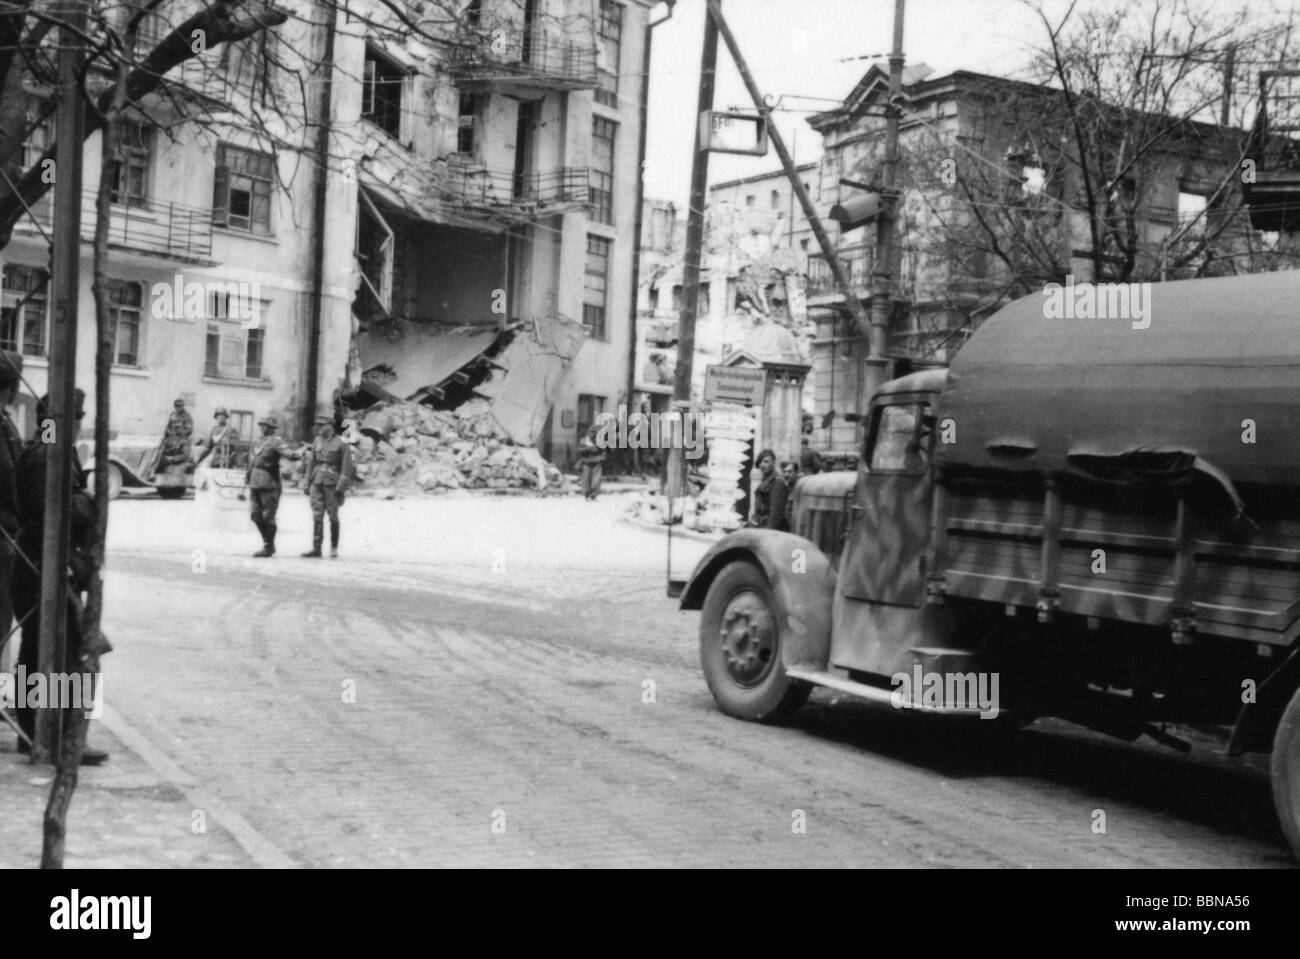 events, Second World War / WWII, Russia 1944 / 1945, Crimea, Wehrmacht lorry in Sevastopol, April 1944, vehicle, vehicles, 20th century, historic, historical, Eastern Front, USSR, Soviet Union, destruction, ruin, Wehrmacht, Third Reich, military, 1940s, people, Stock Photo